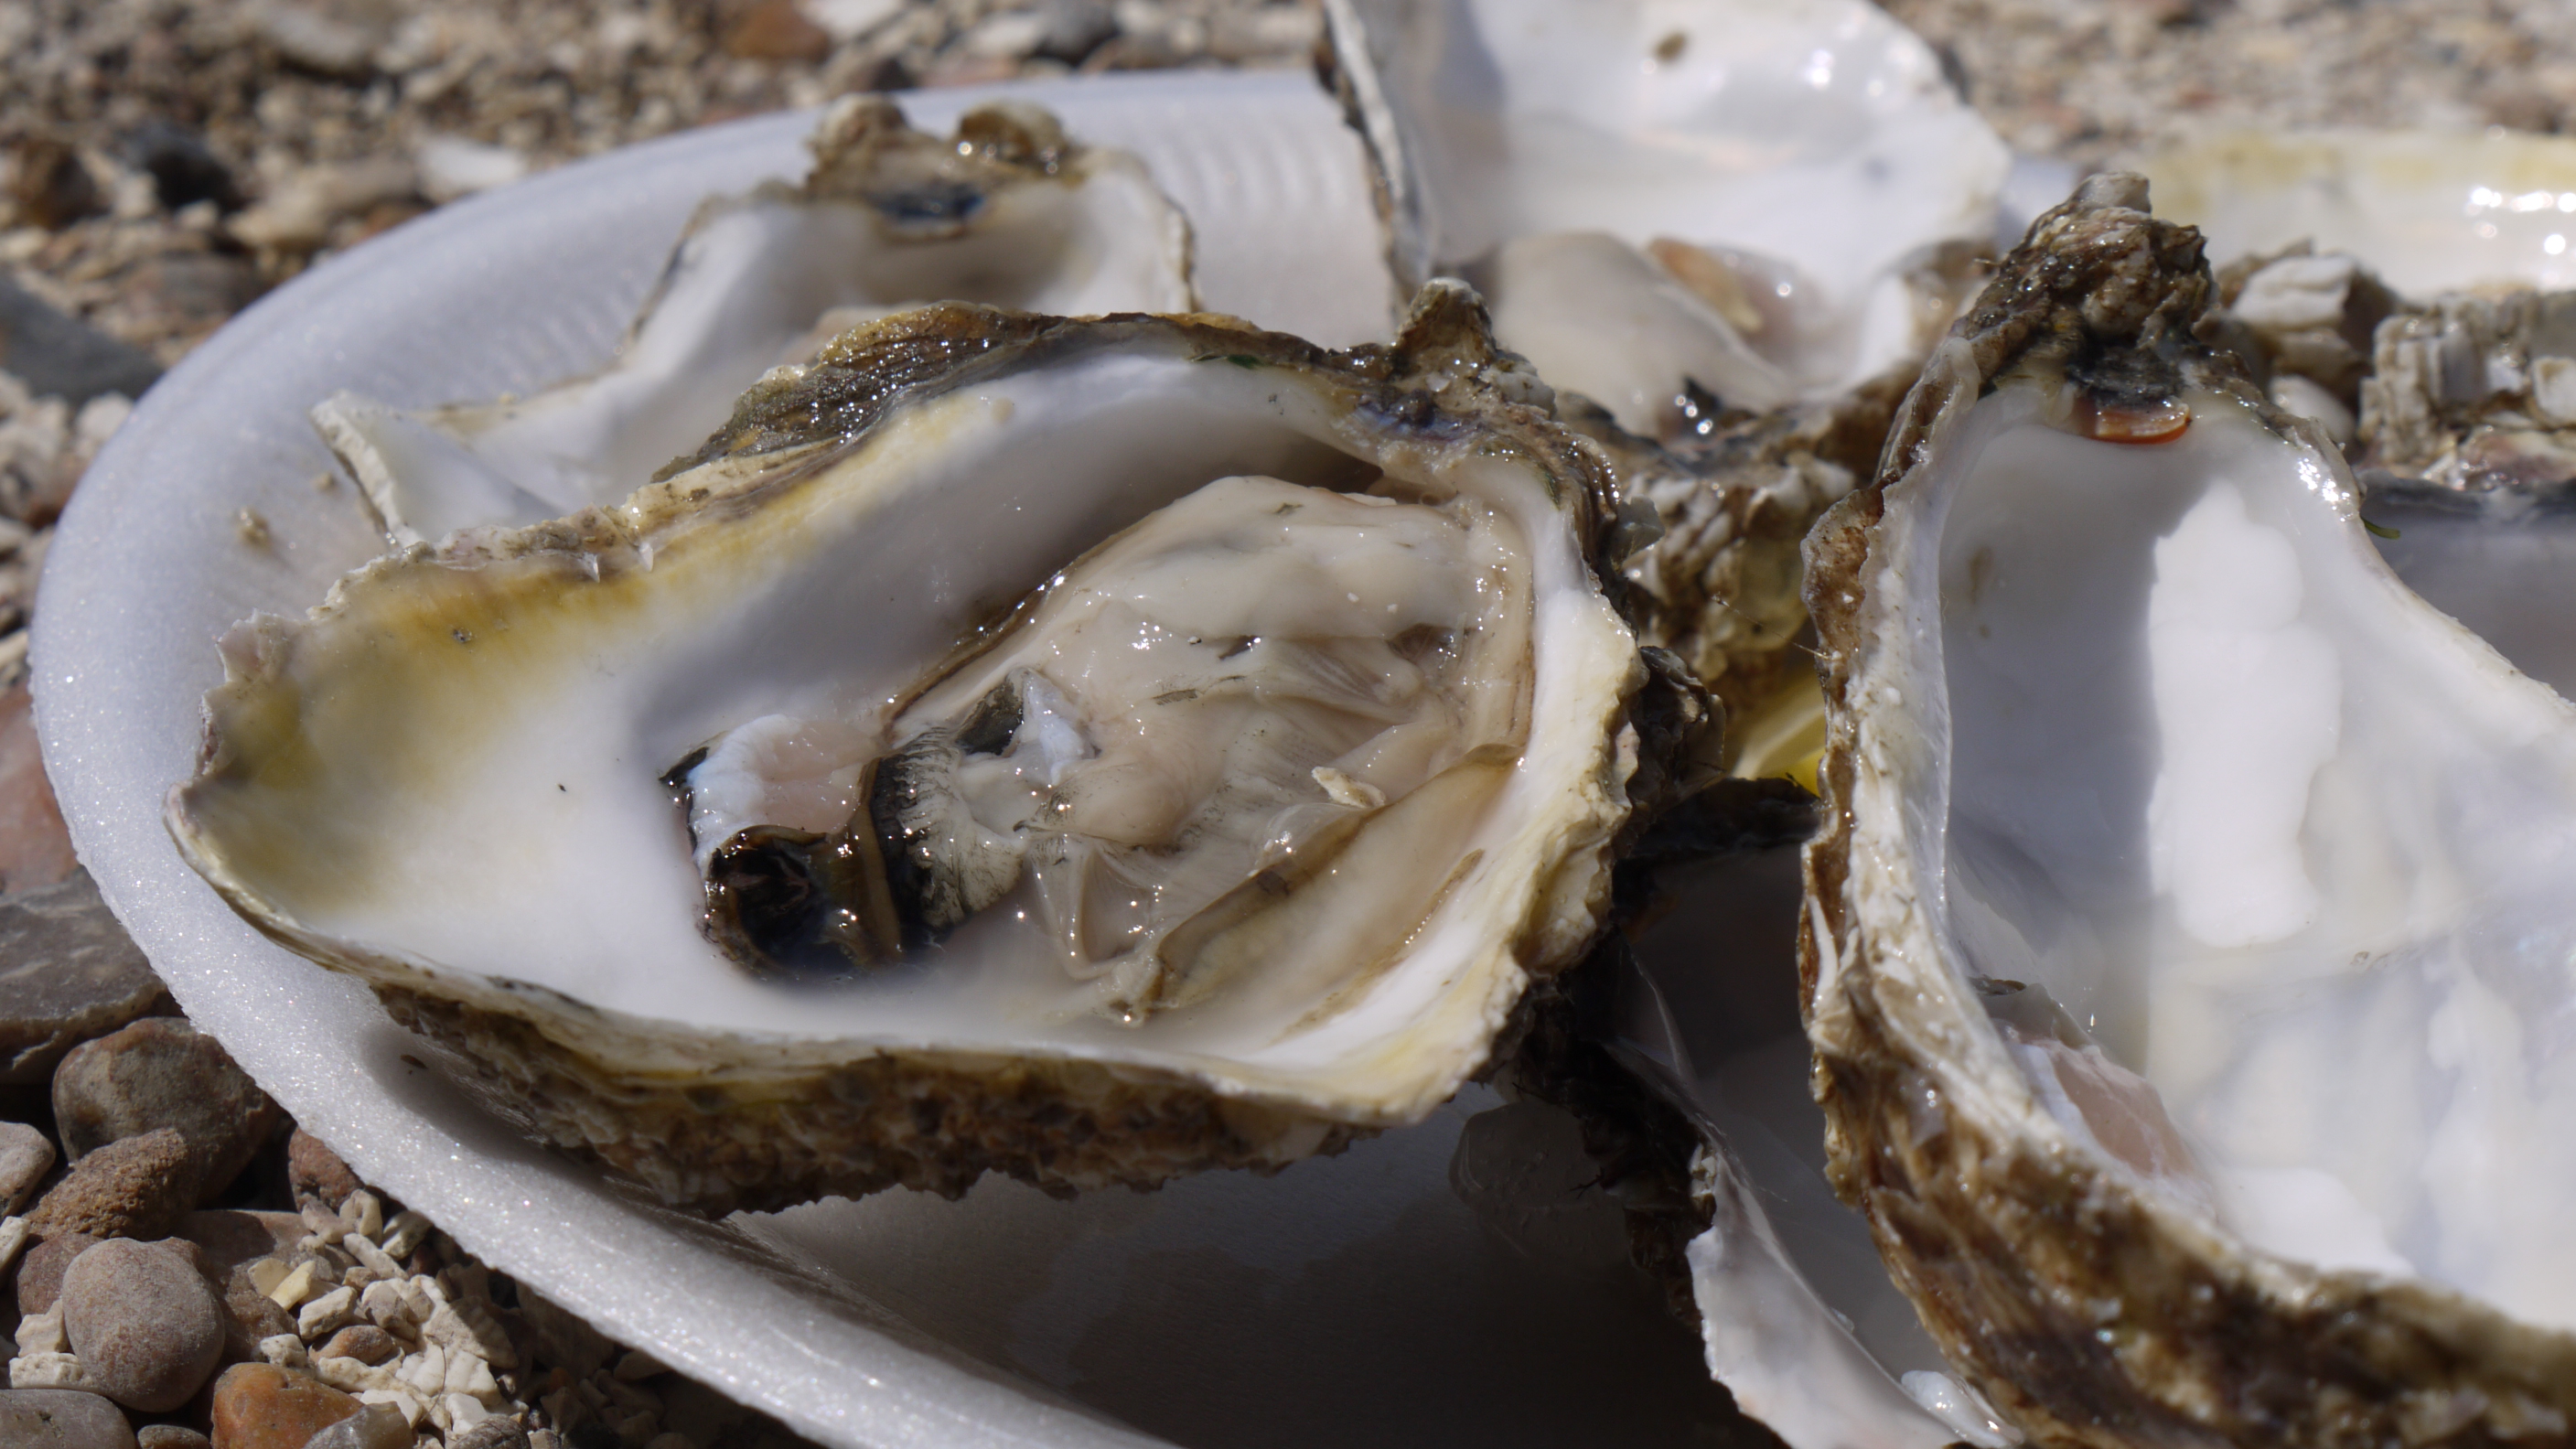 A lovely picture of a raw oyster, opened